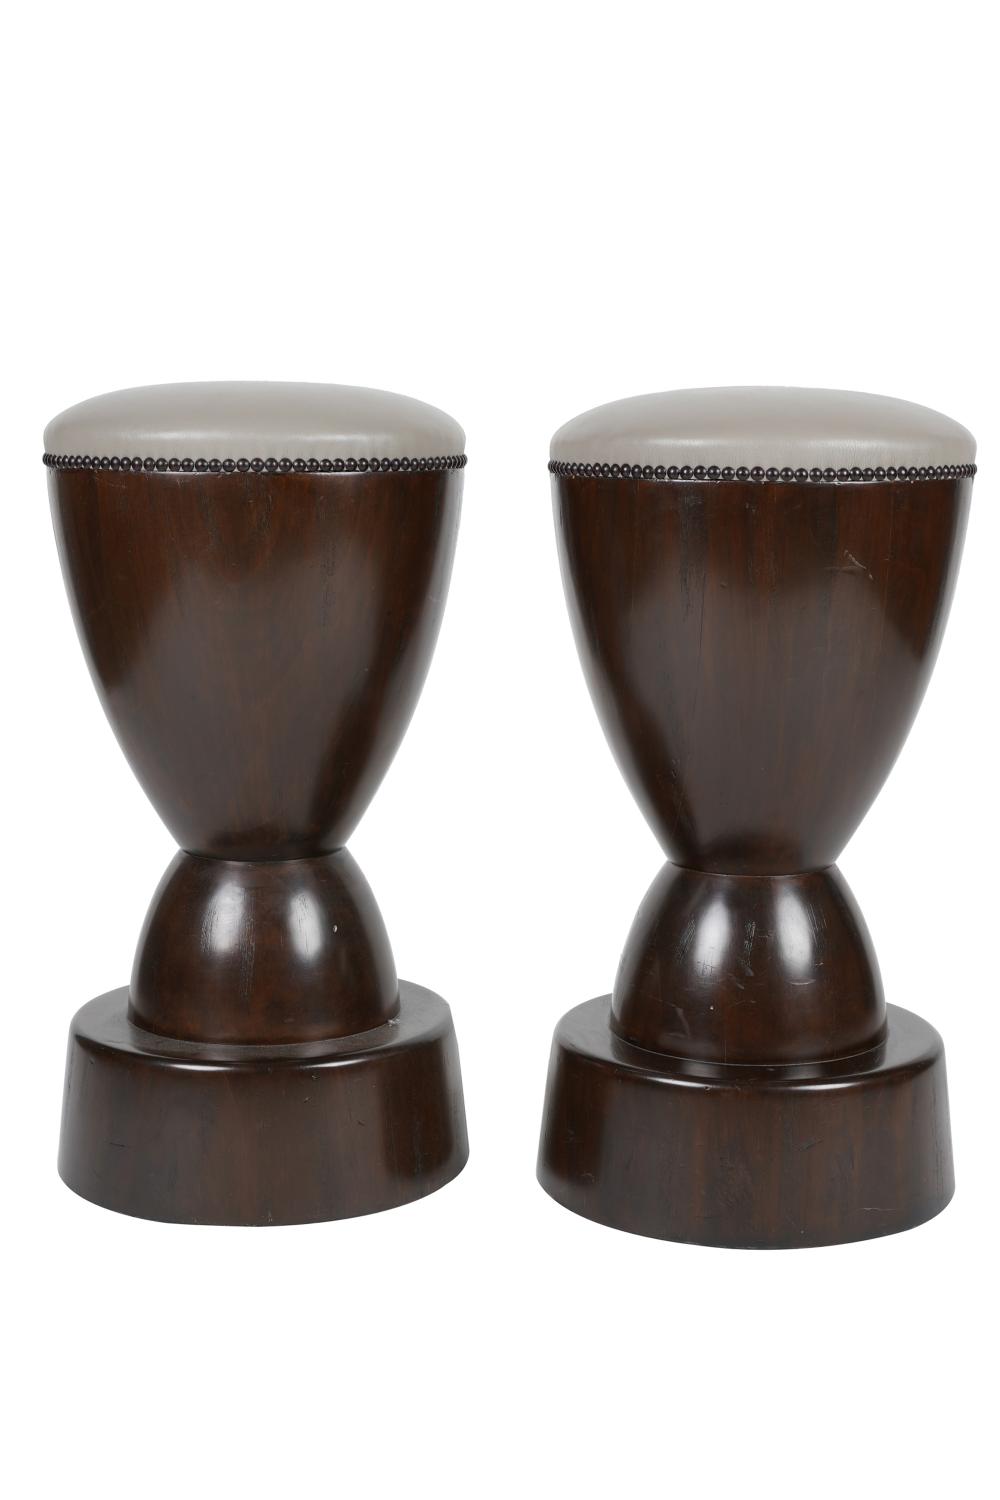 PAIR OF STAINED WOOD BAR STOOLSunsigned  333648